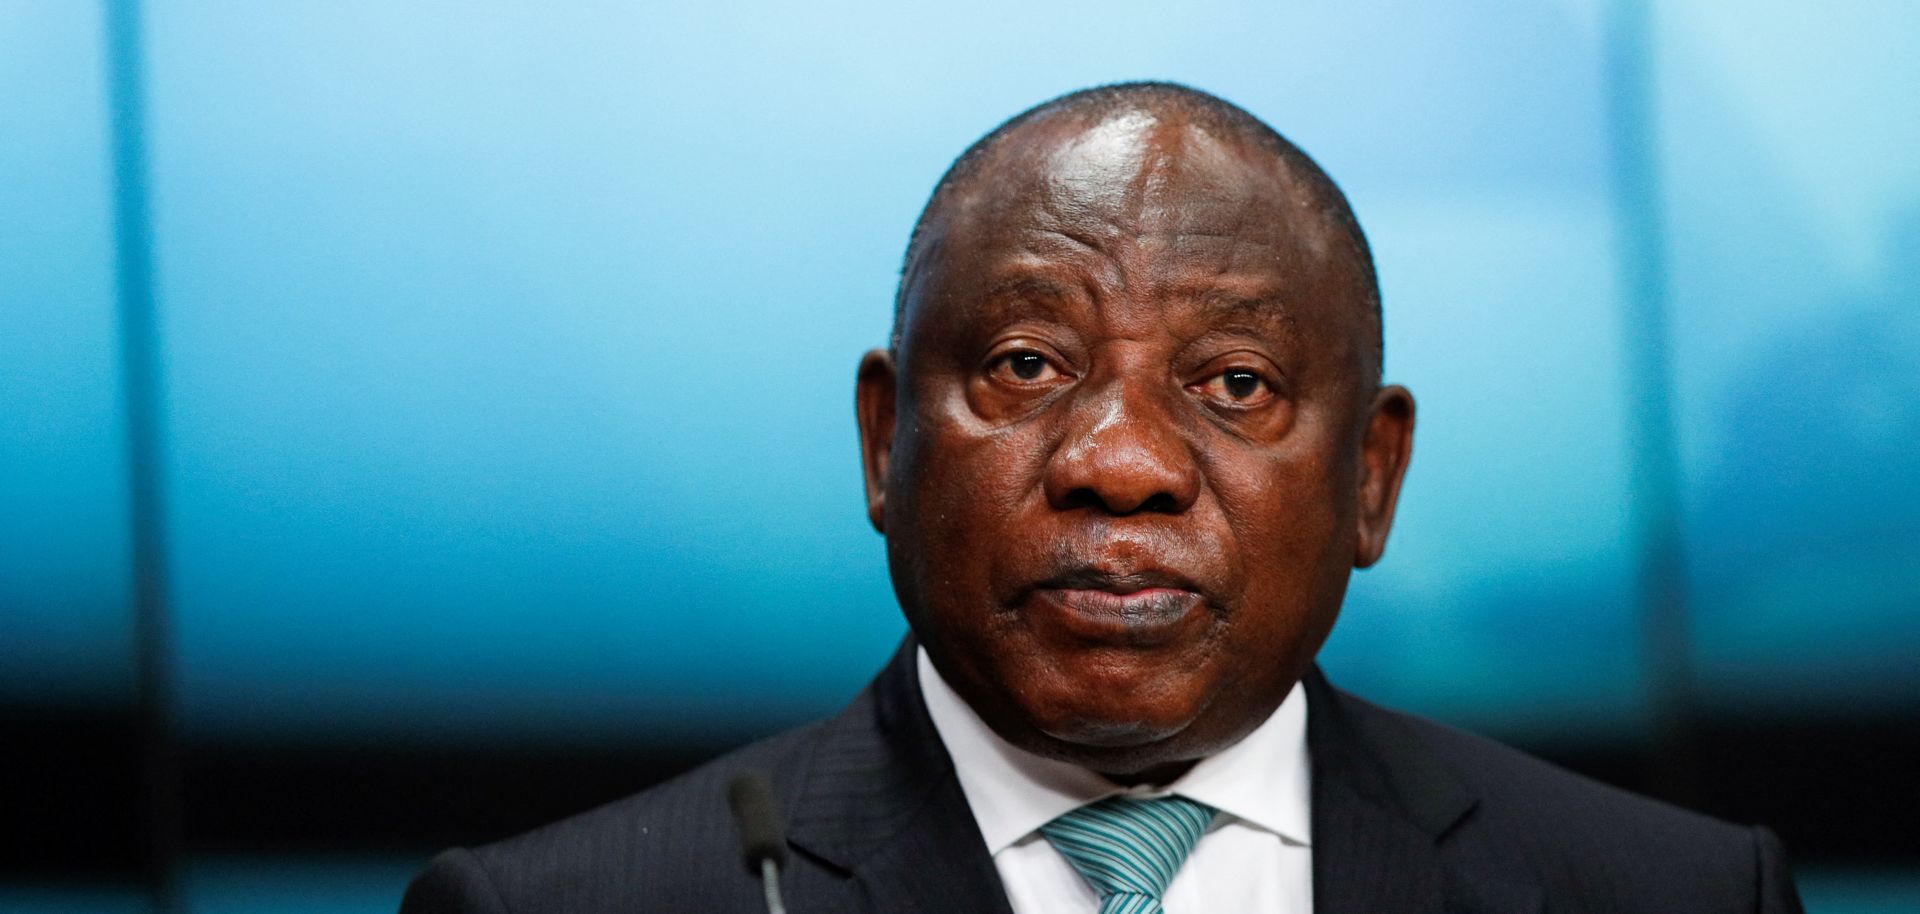 South African President Cyril Ramaphosa gives a statement during a summit at the European Union in Brussels, Belgium, on Feb. 18, 2022. 